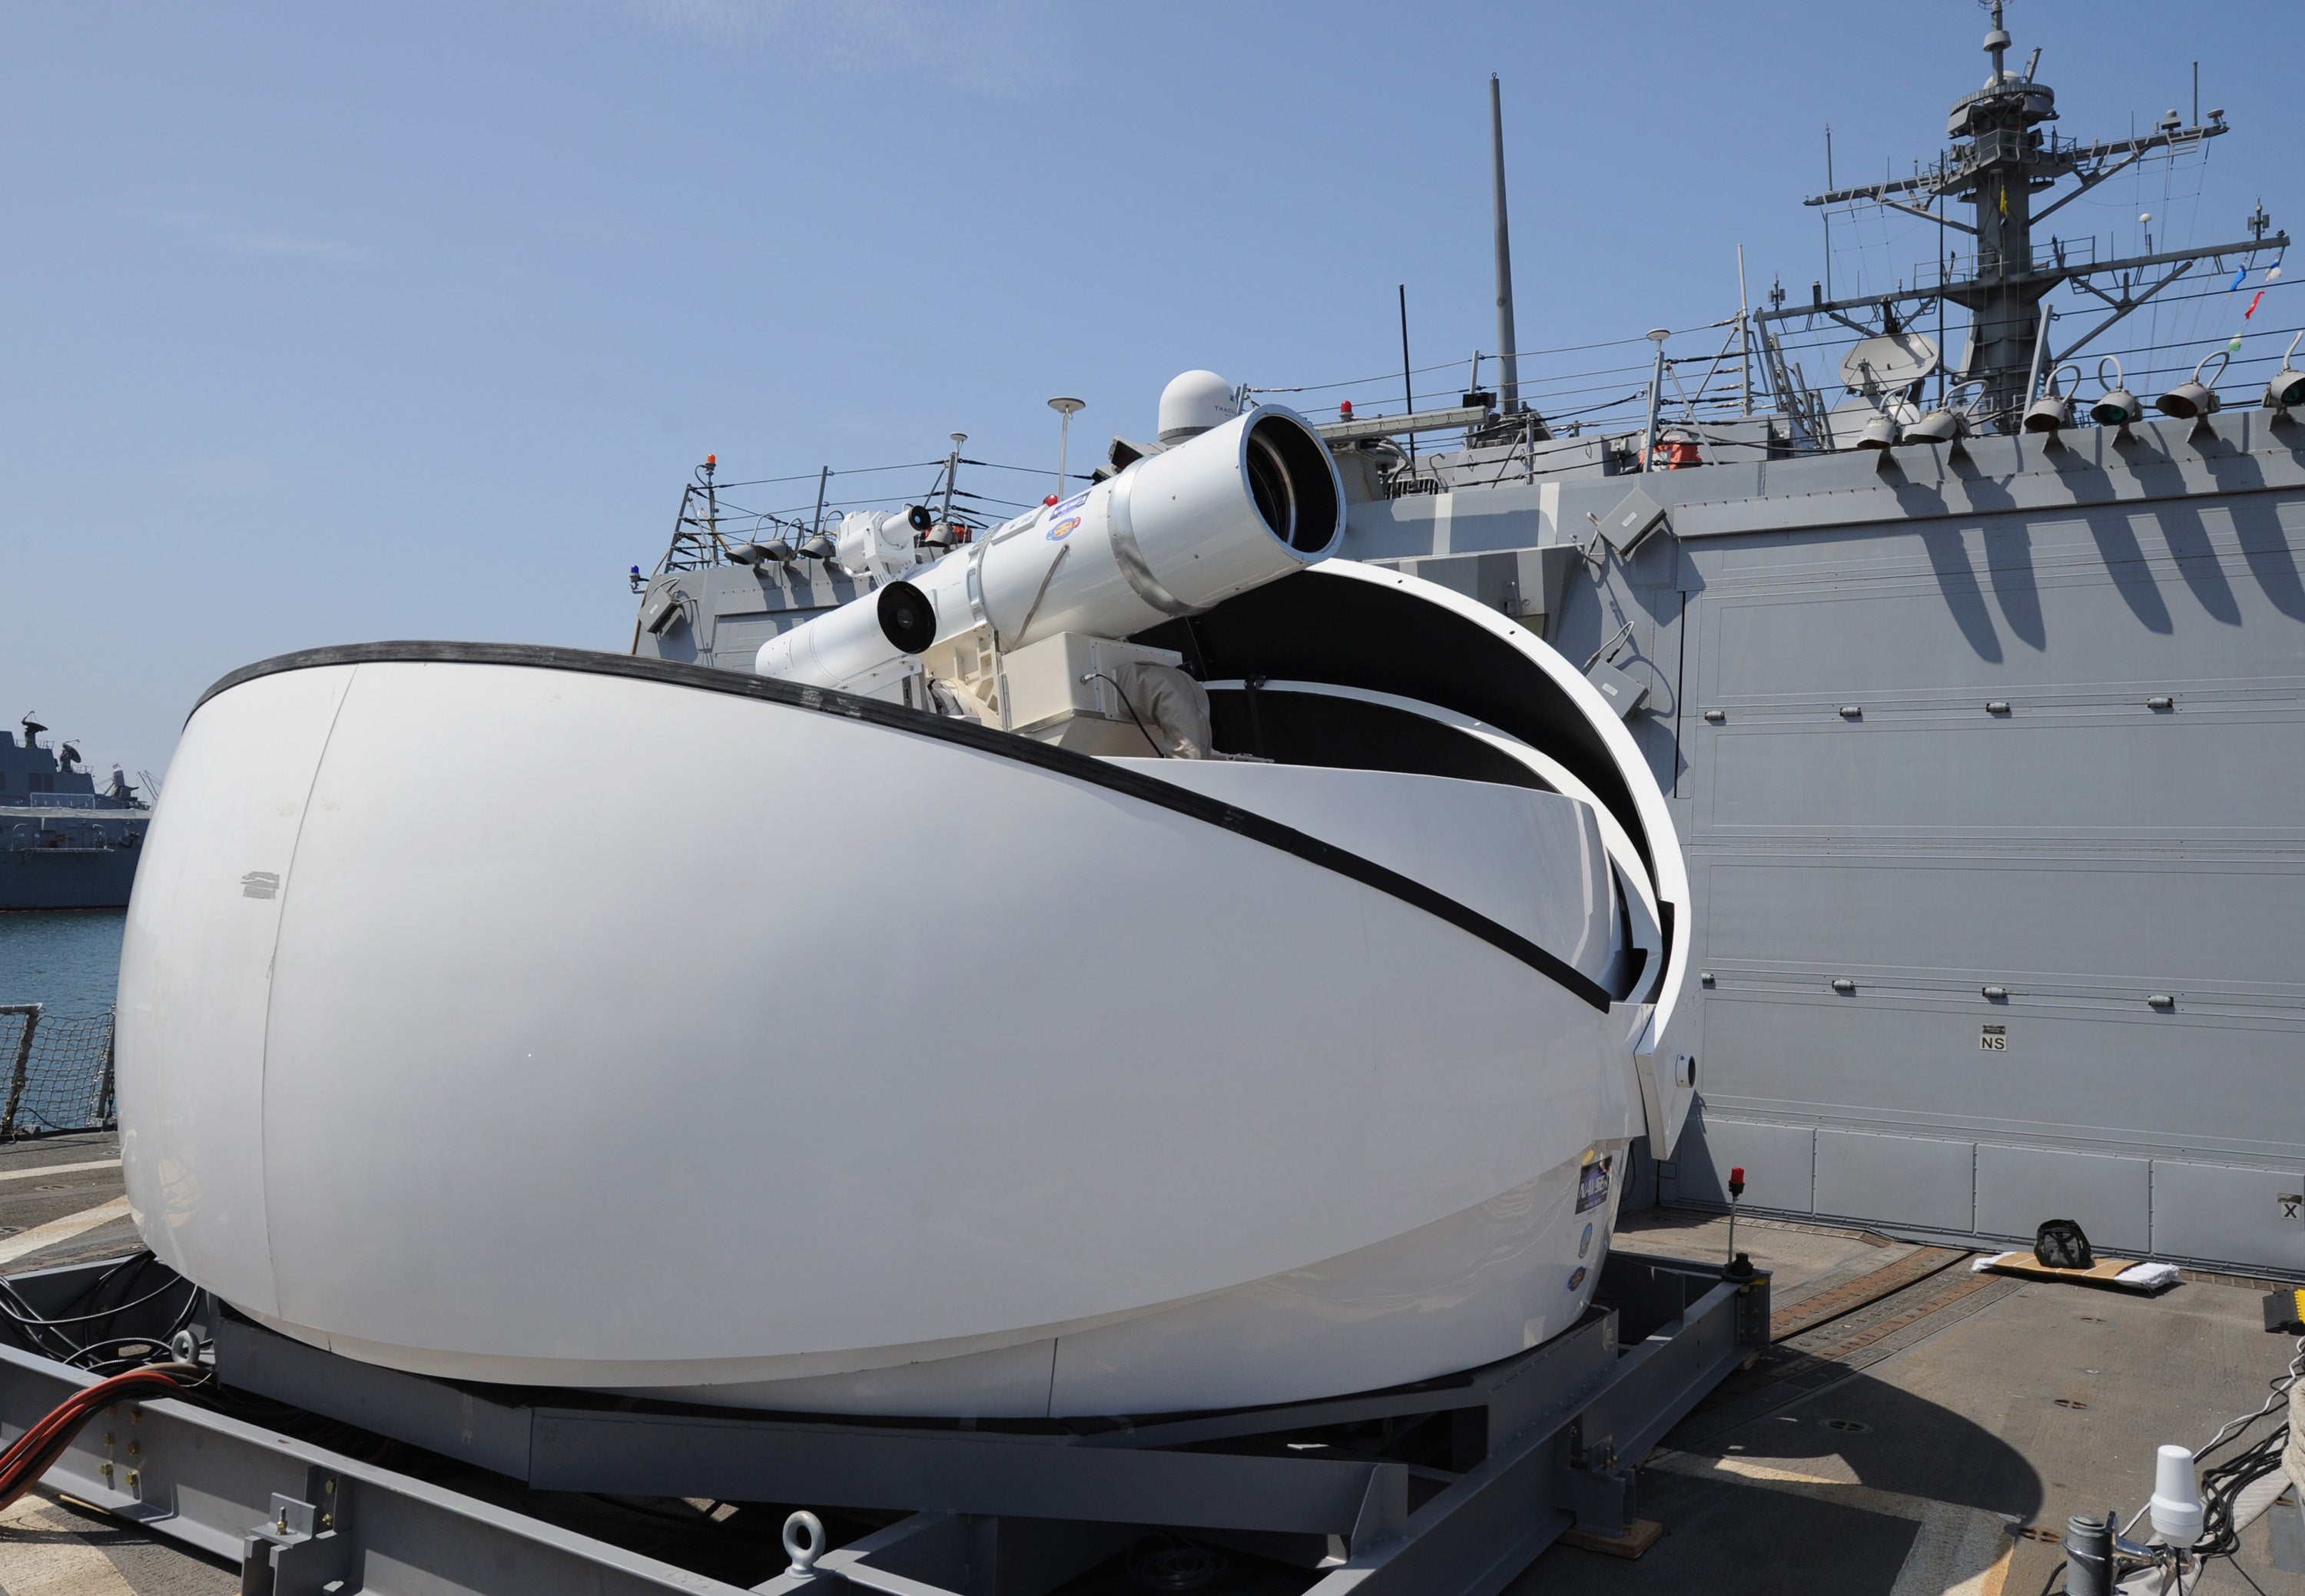 The Laser Weapon System or LaWS